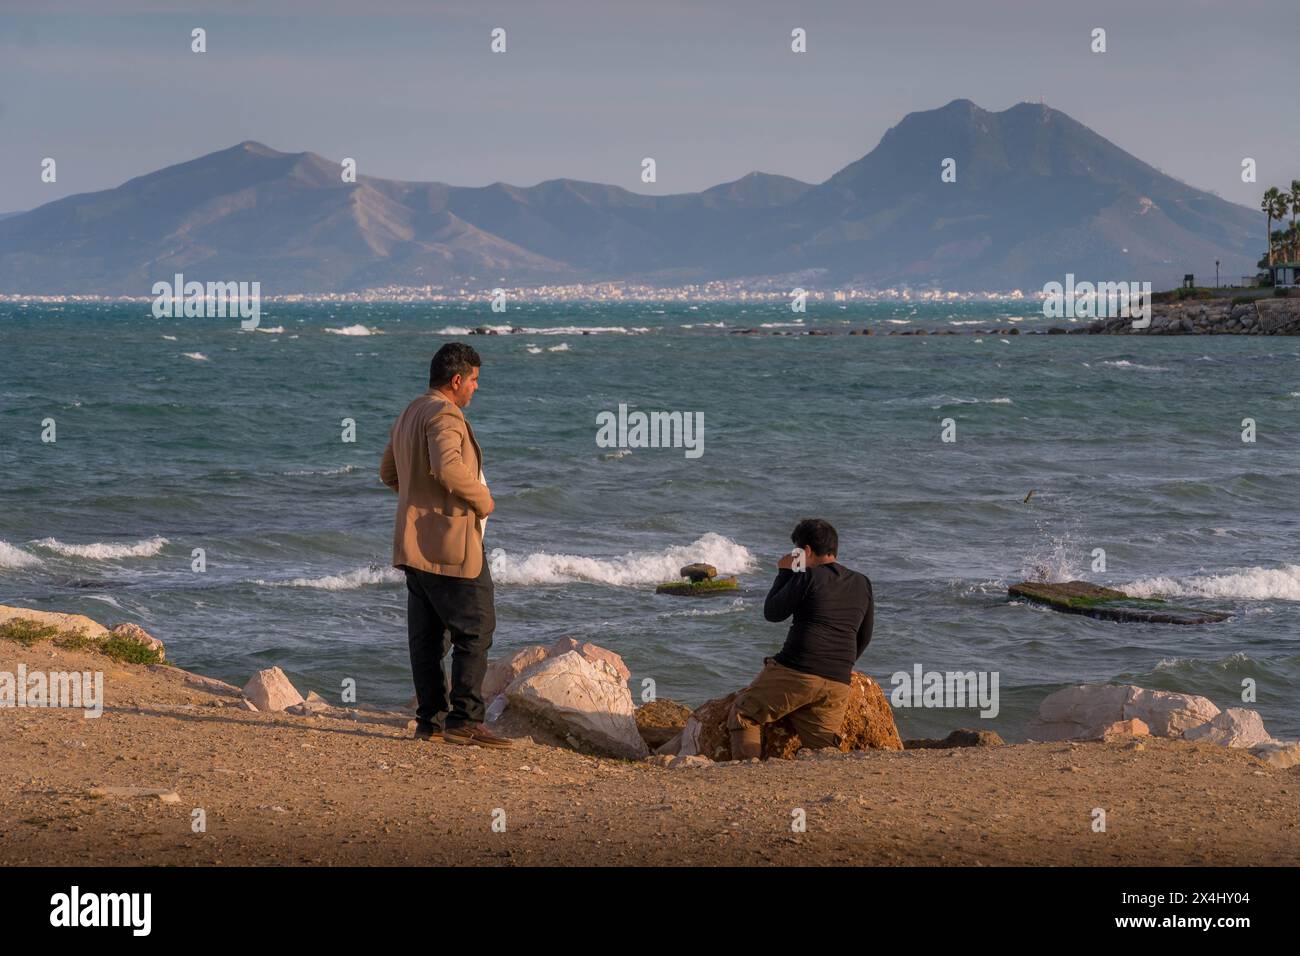 Two men talking on the coastline in Tunisia's Carthage district with the Boukornine mountains in the background during the hot summer day. Stock Photo